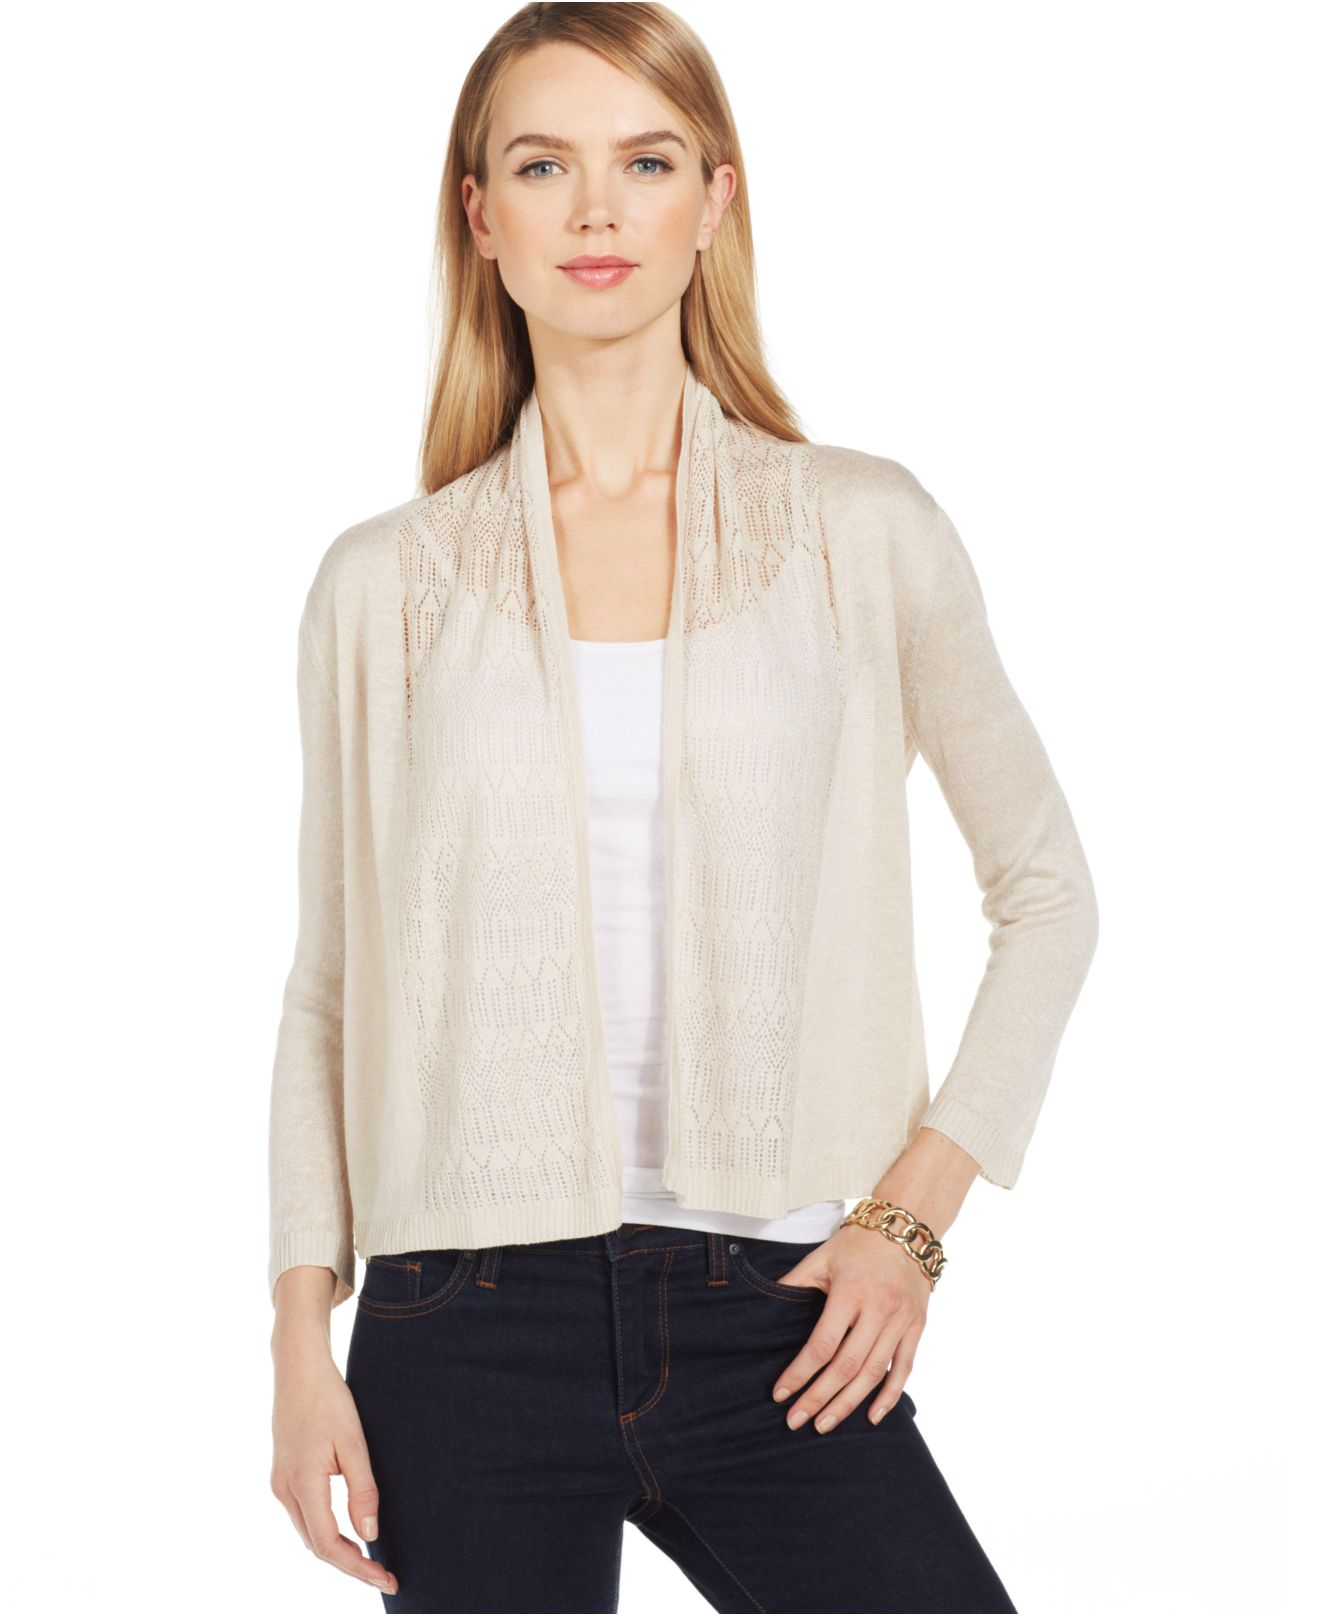 Lyst - Jones New York Collection Pointelle-Trim Open Cardigan in Natural